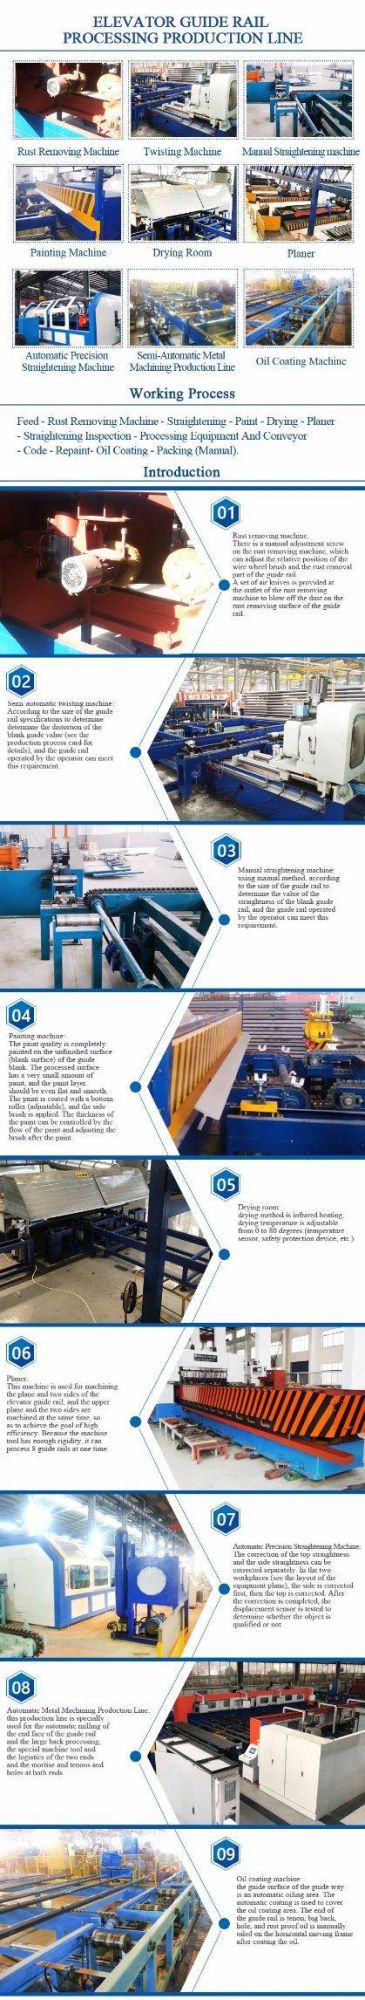 Customized Automatic Metal Roller Shutter Door Roll Forming Machine for Elevator Guide Rail